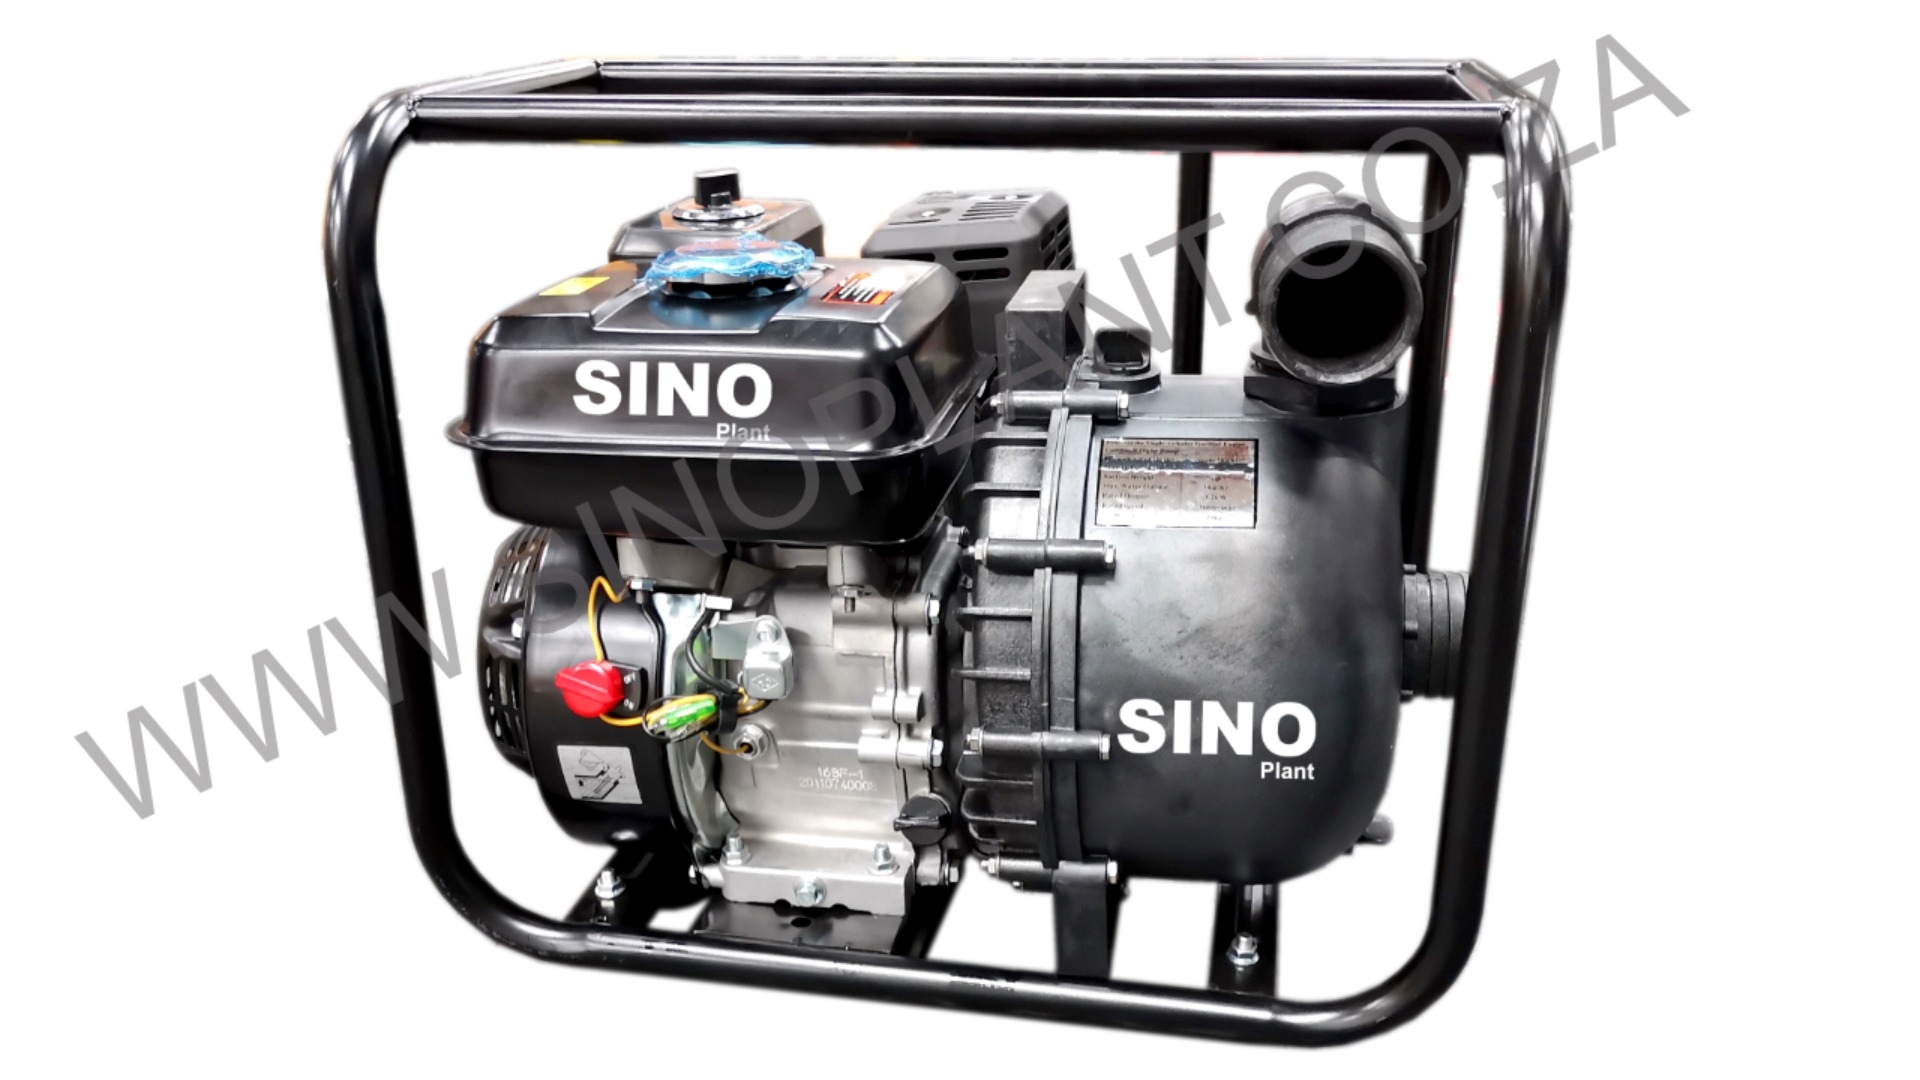 Sino Plant Water pumps Water Pump – Chemical 2" Petrol Engine 2022 for sale by Sino Plant | Truck & Trailer Marketplaces